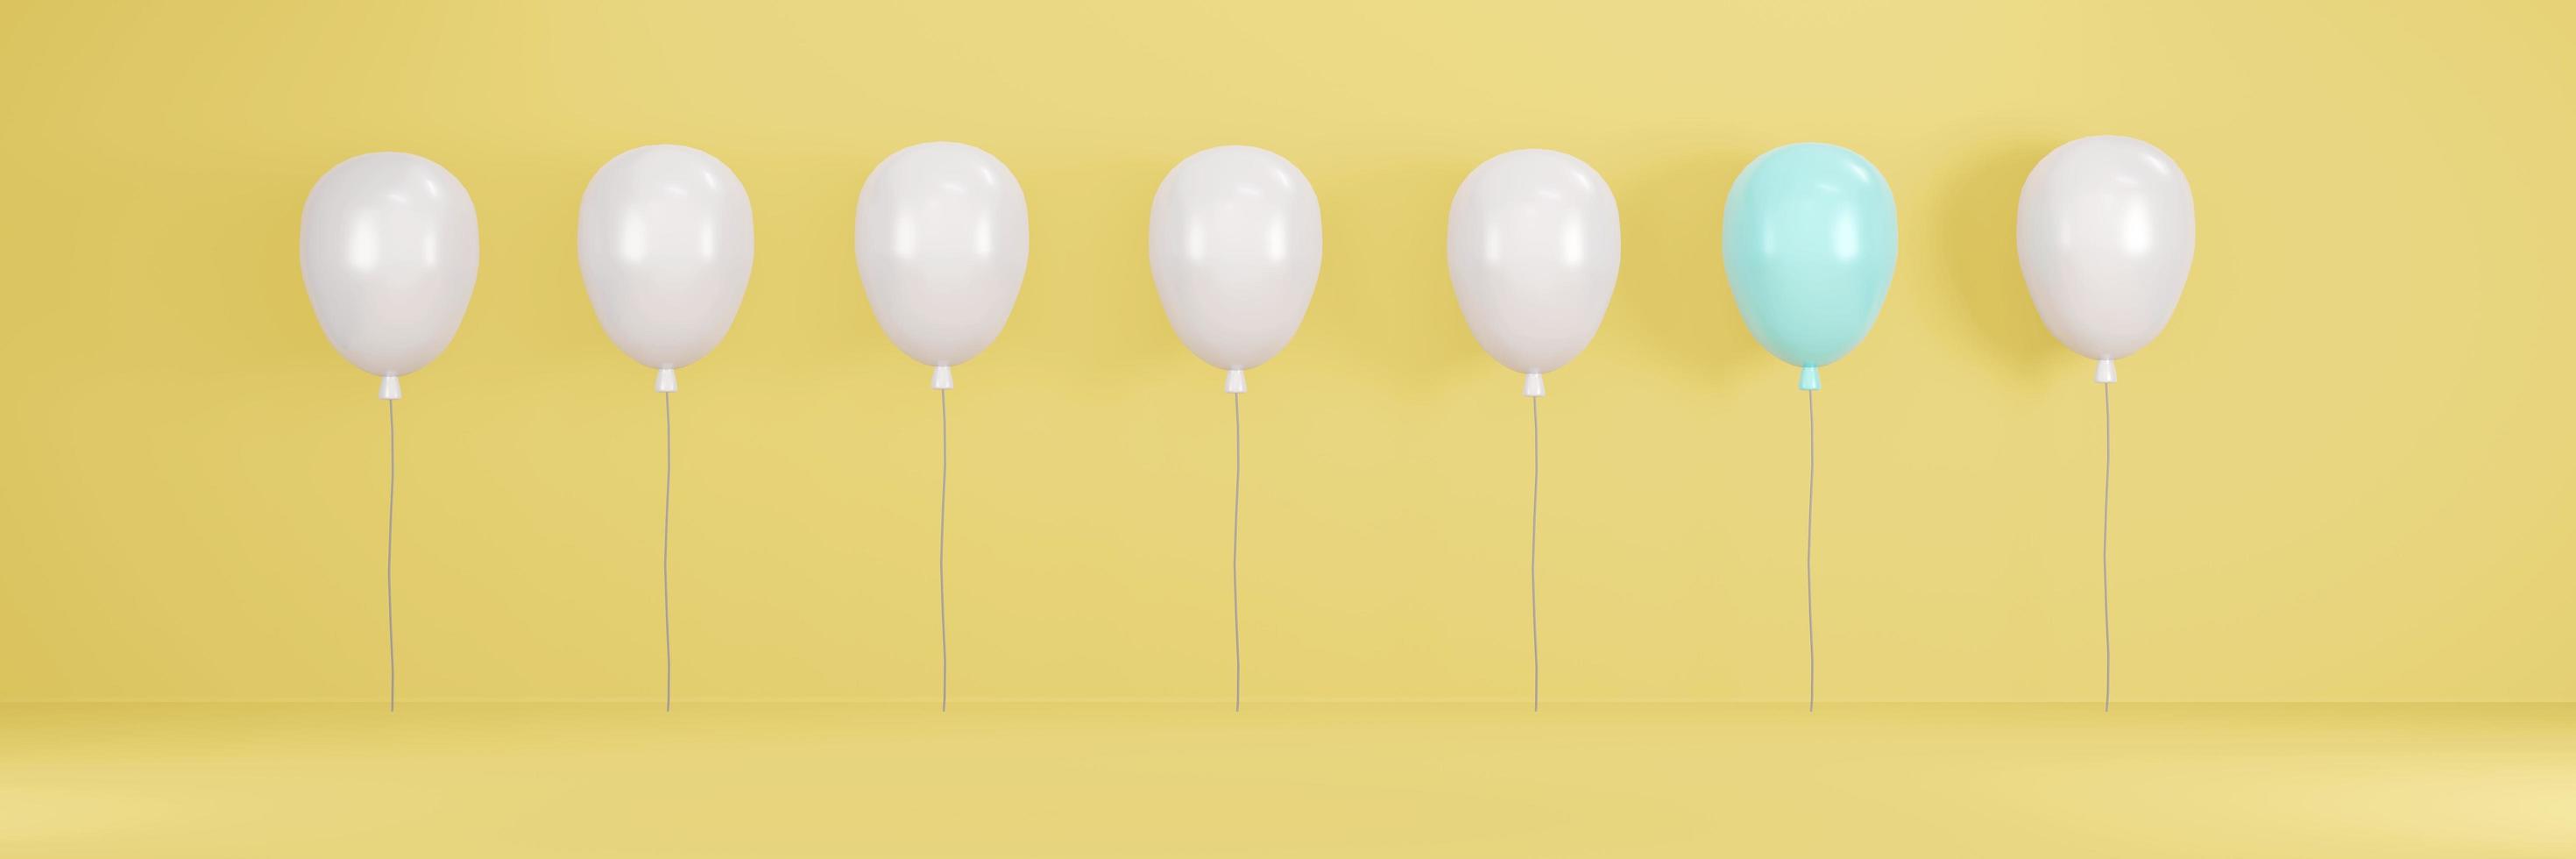 3D Rendering blue balloon stand out from crowd on yellow background concept of stand out from the crowd and difference. 3D Render. 3d illustration. Minimal style. photo